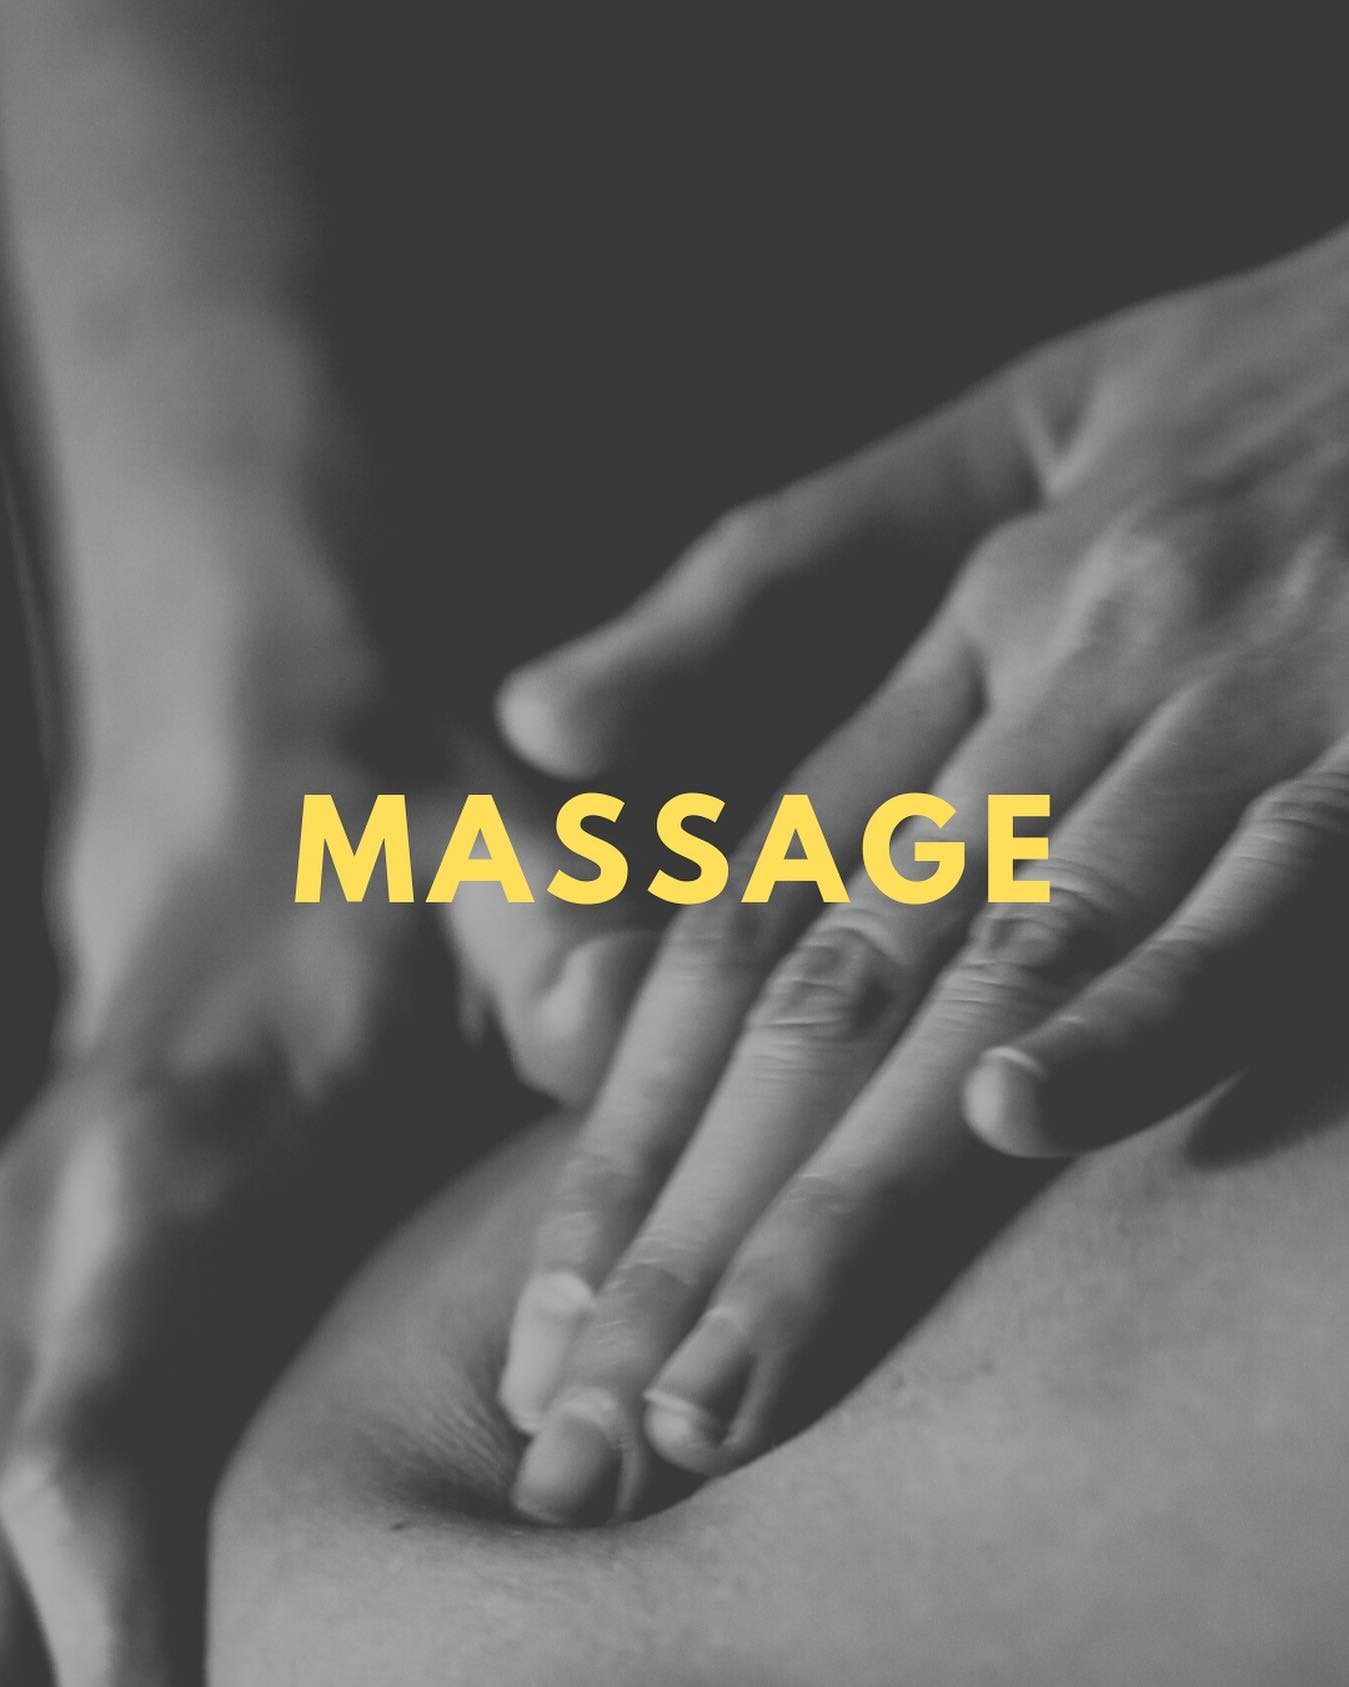 Have you seen our latest Instagram guide? 💆&zwj;♂️

Visit our profile and select the book icon underneath our highlights. There you will find our newest guide on Massage Therapy! 

We have gathered  content about massage therapy for you to have an e